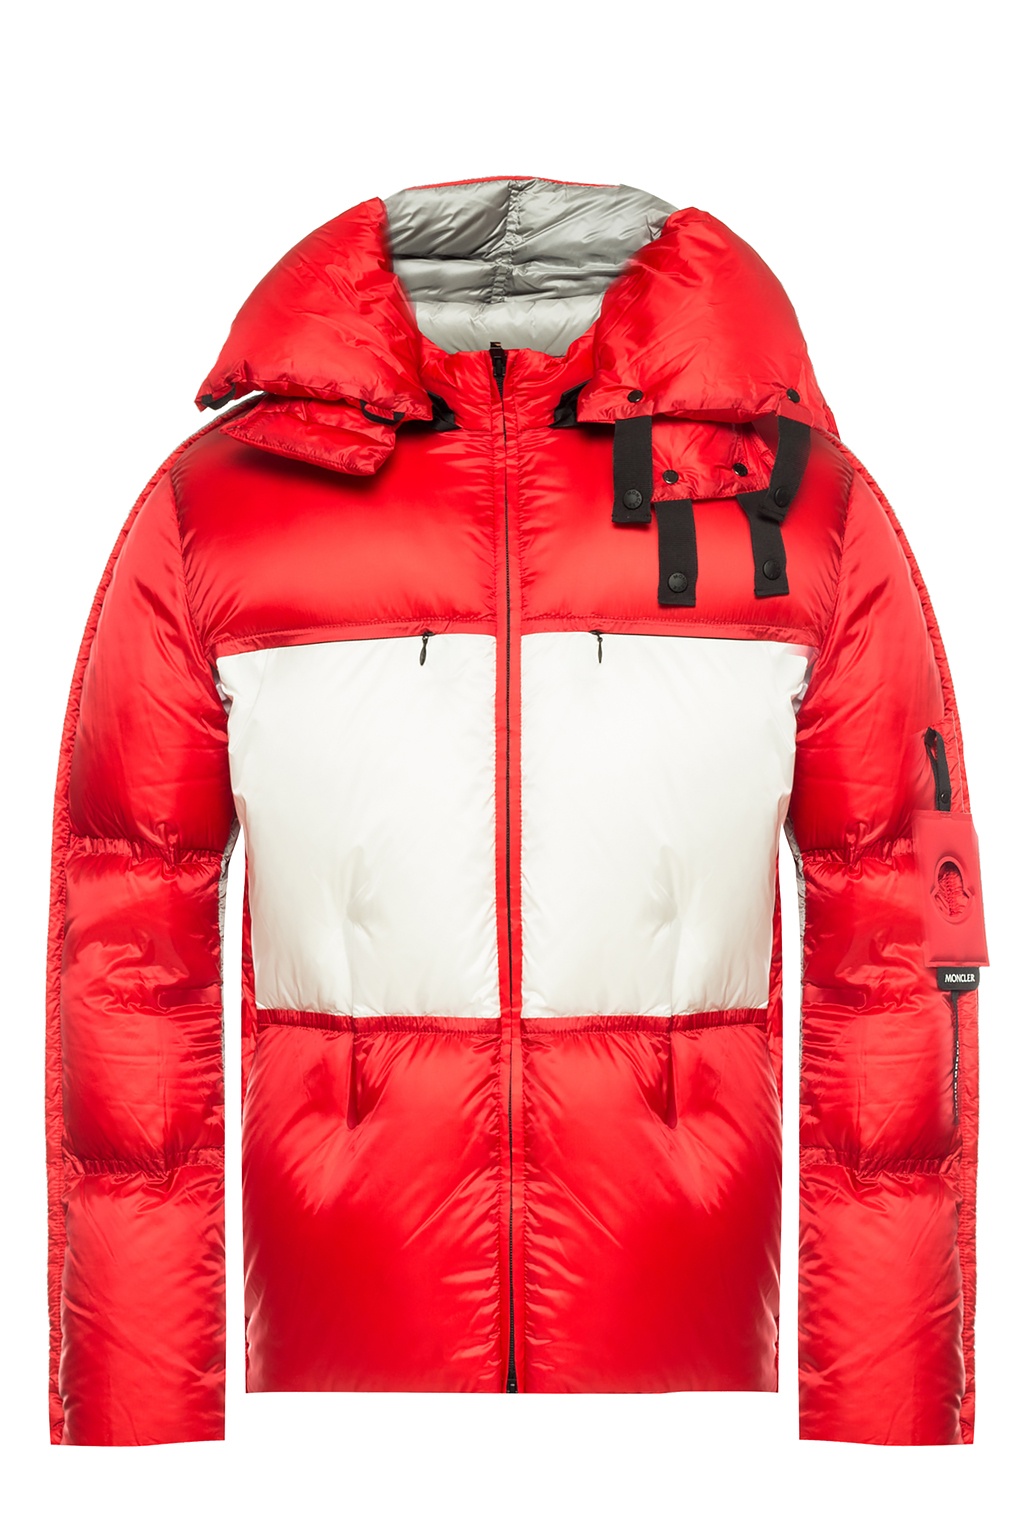 Moncler Genius 5 Lets keep in touch